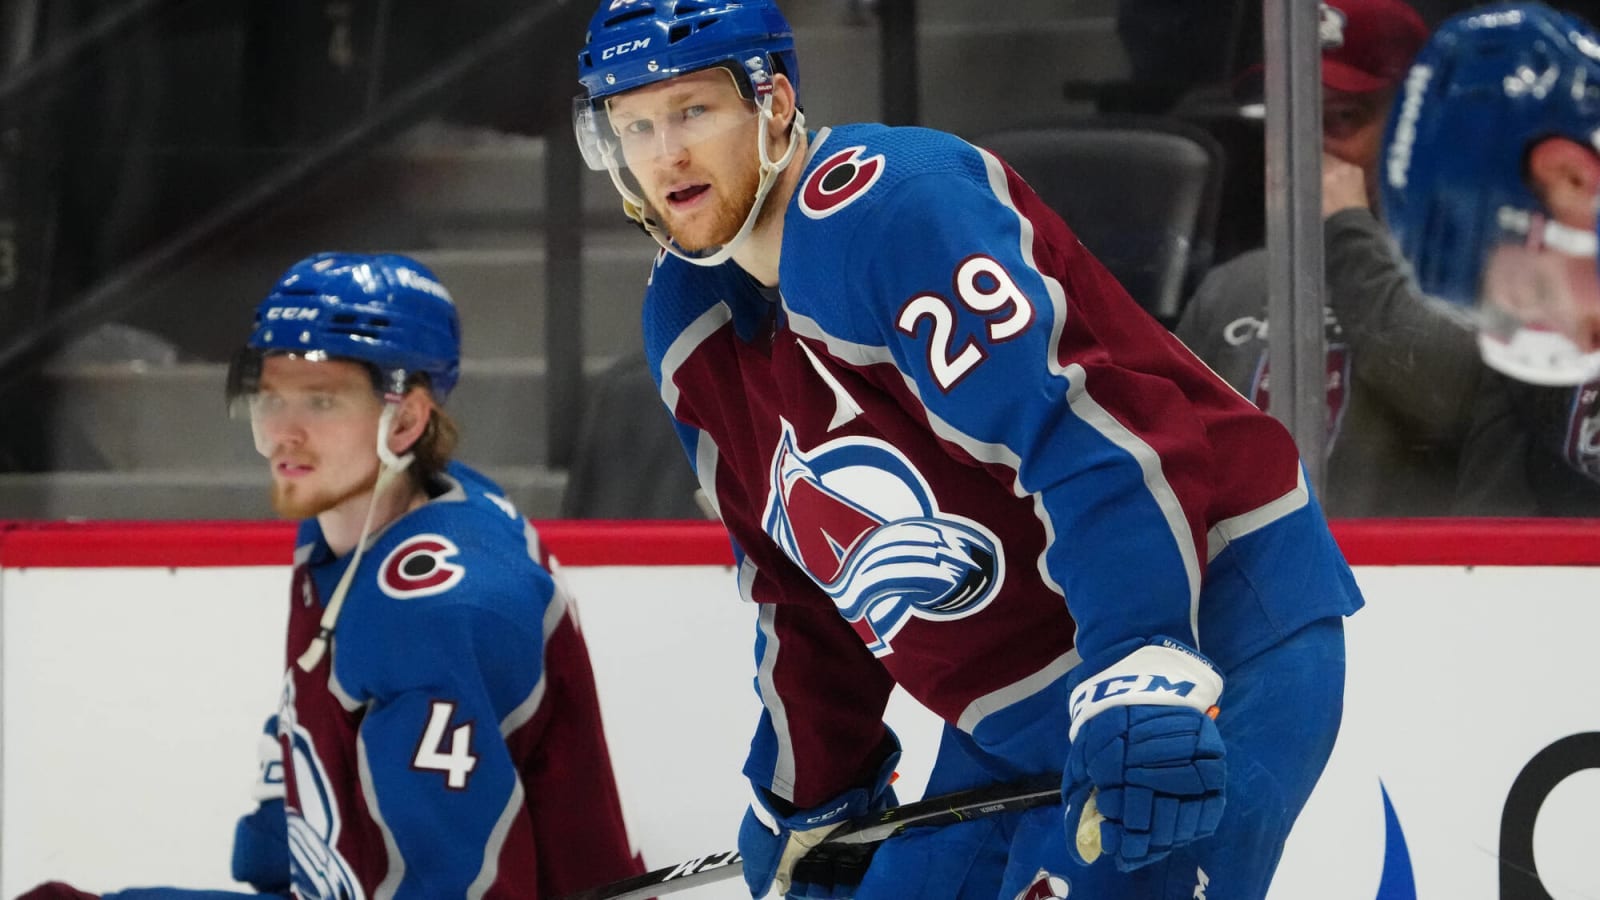 Revamped Avalanche Favored to Return To Cup Contention